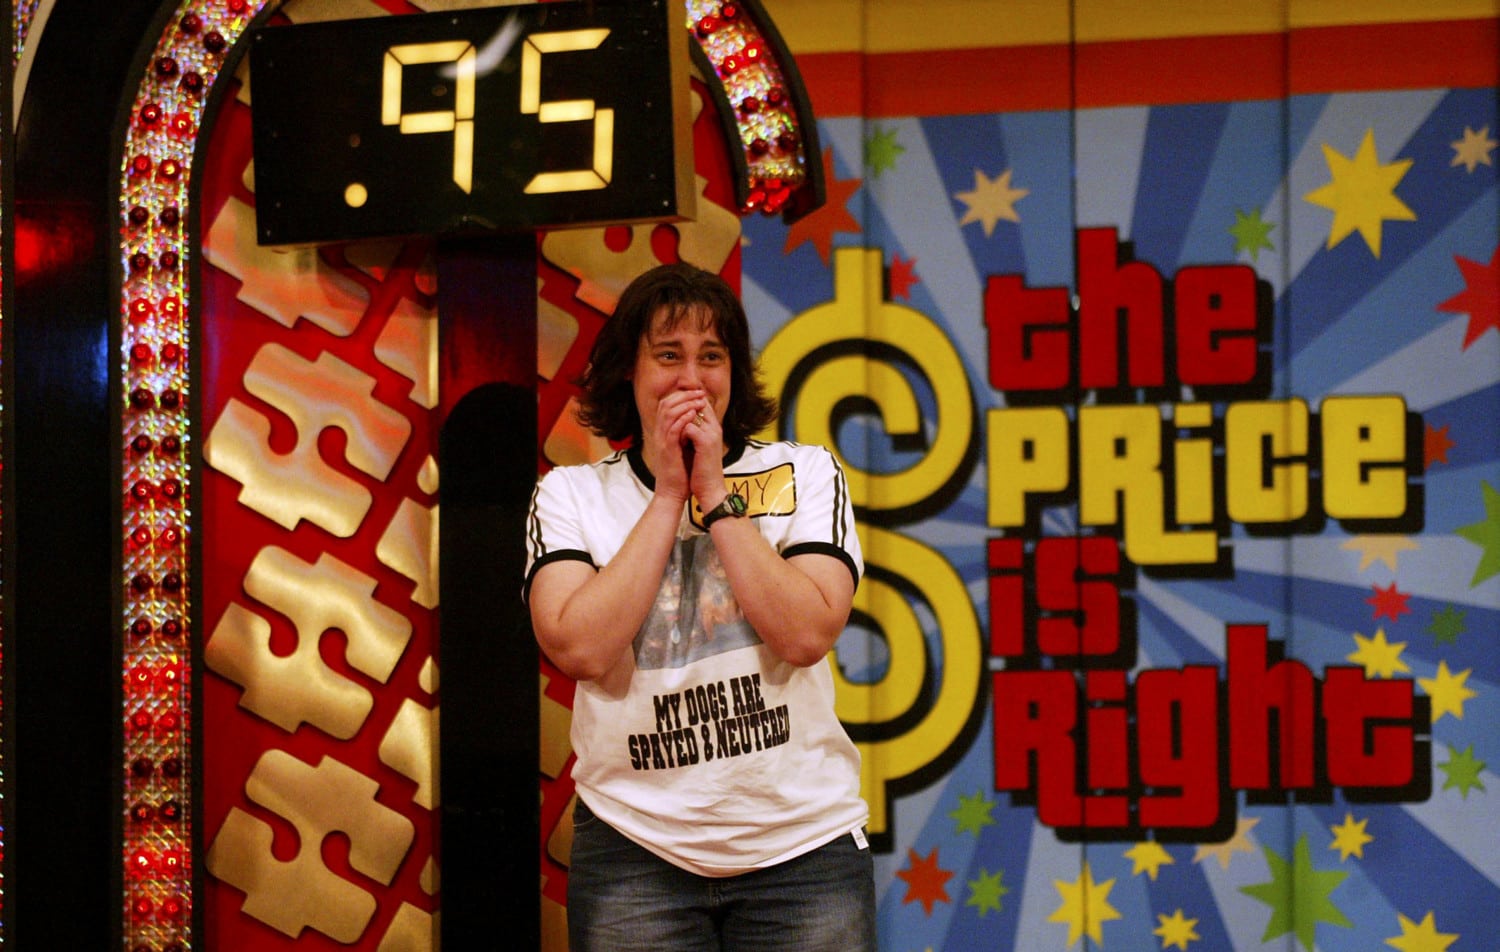 price is right game photo